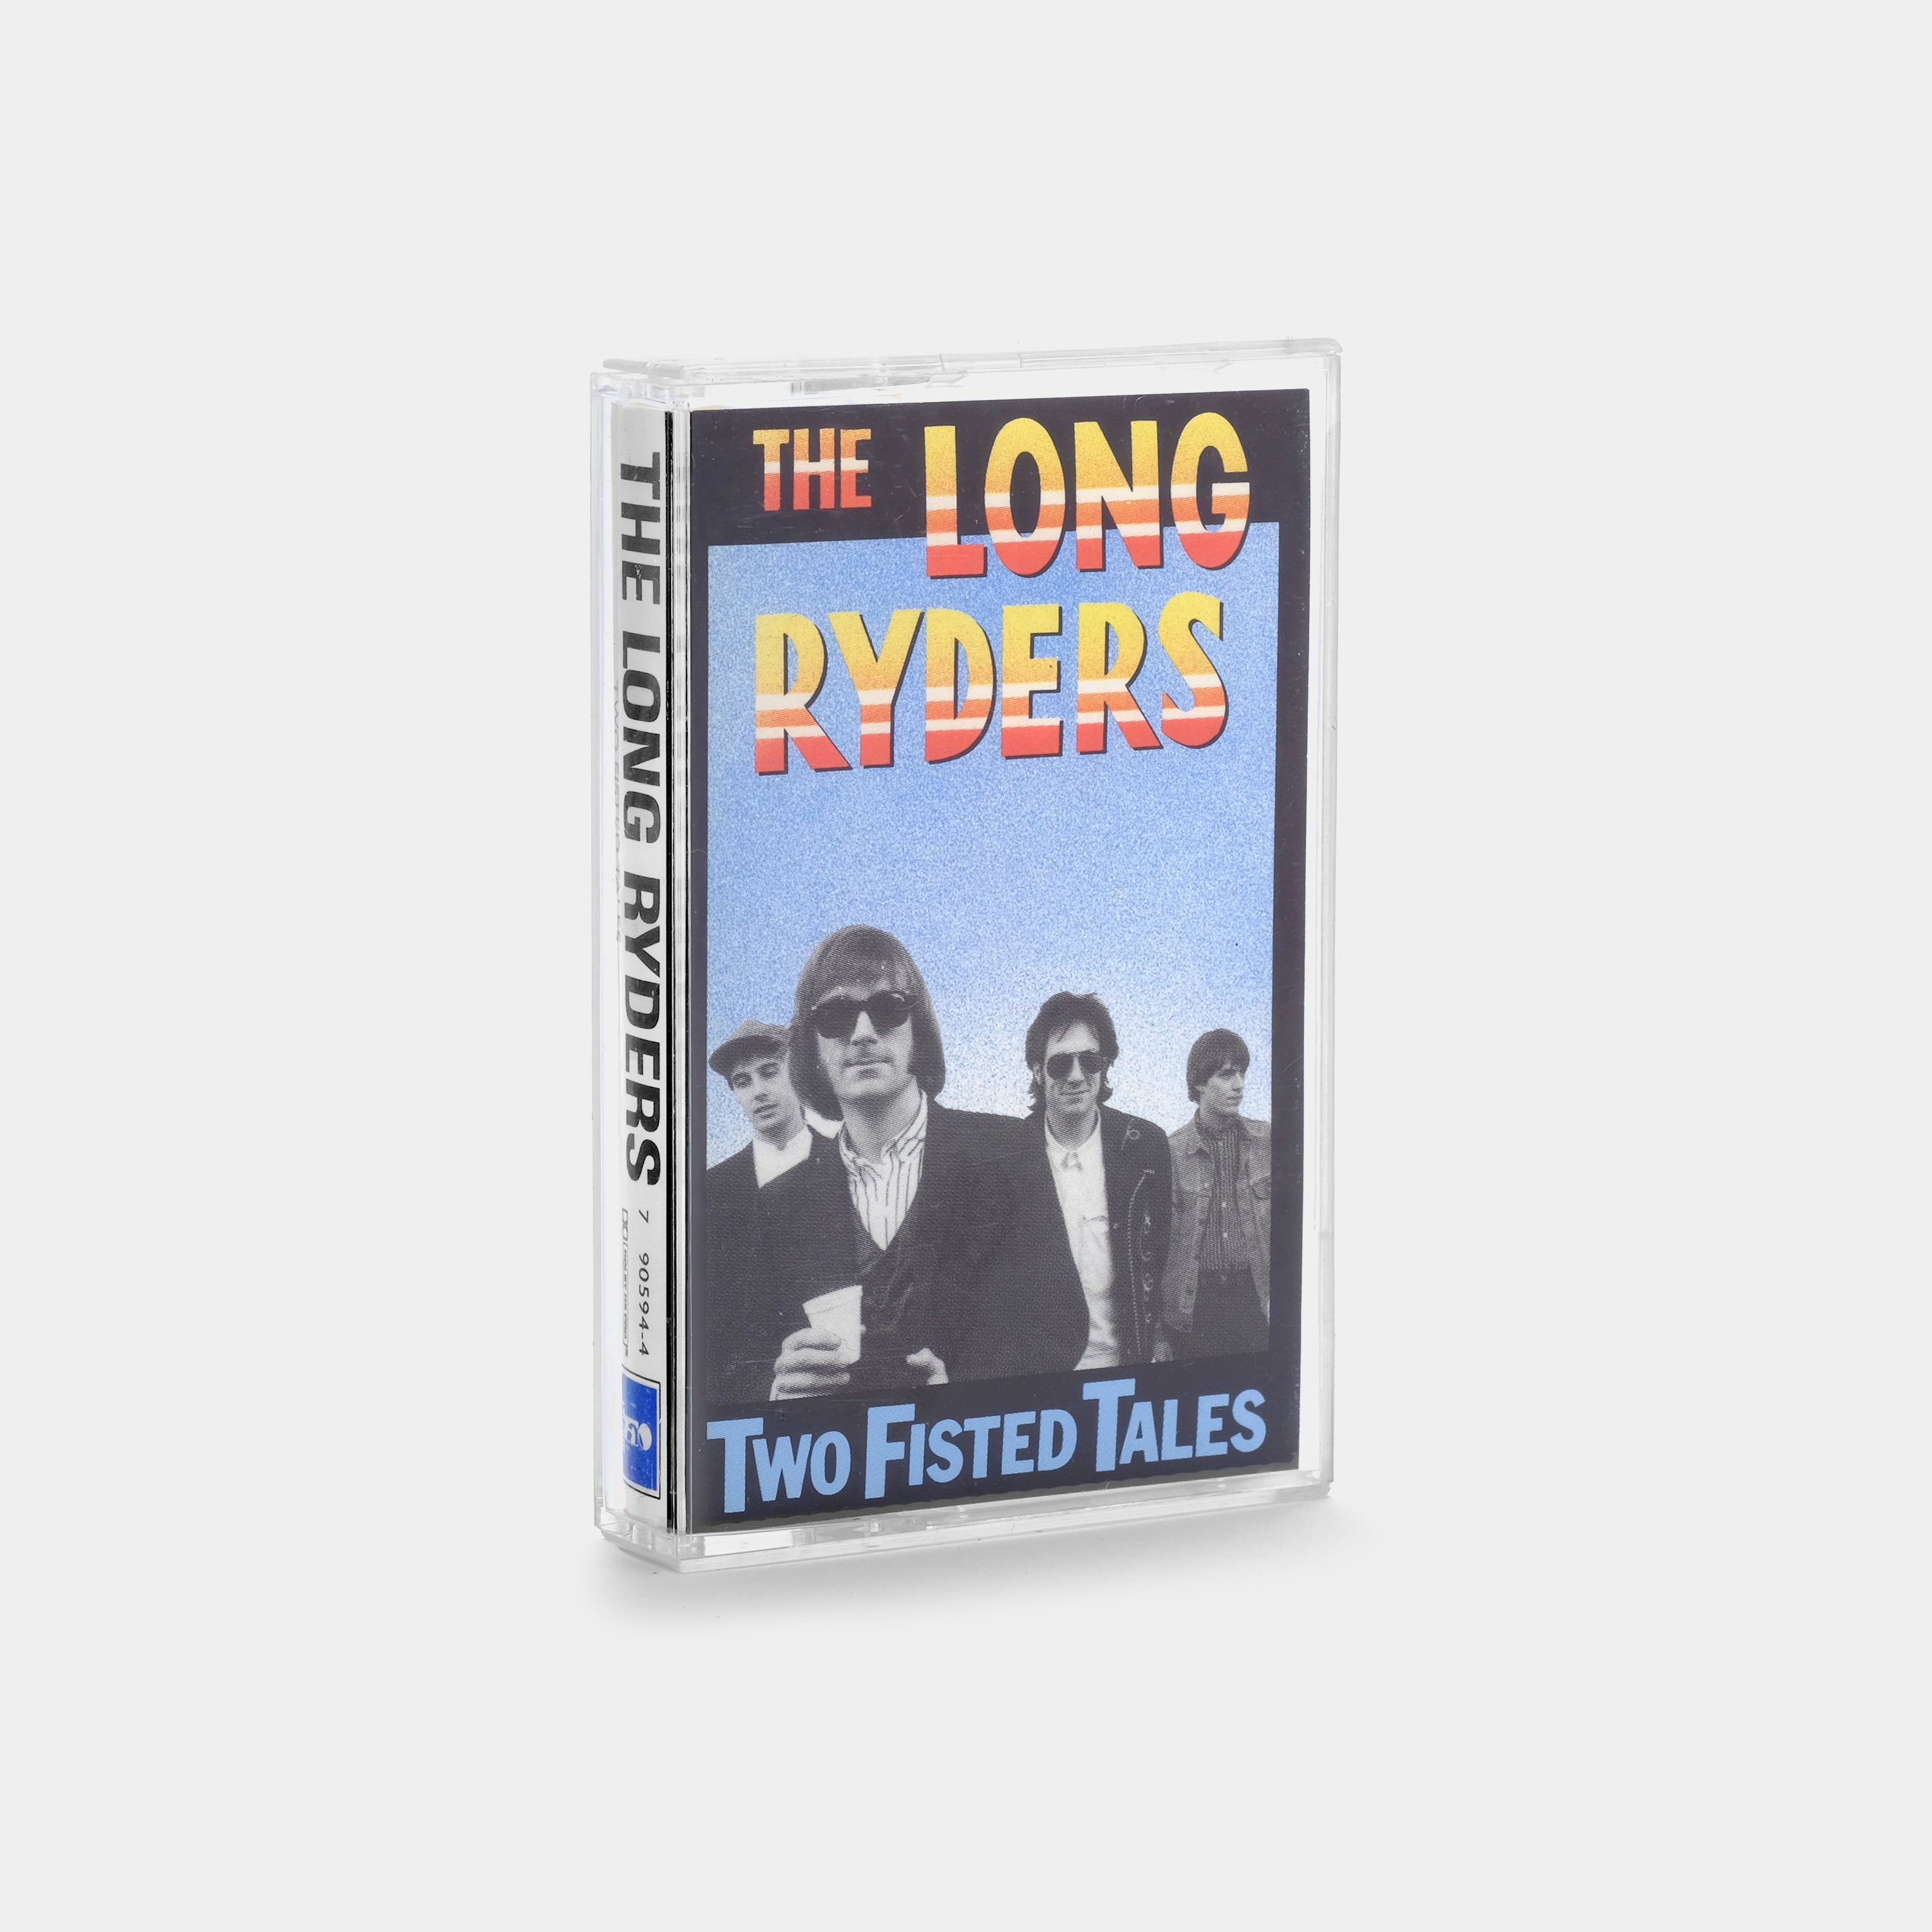 The Long Ryders - Two Fisted Tales Cassette Tape